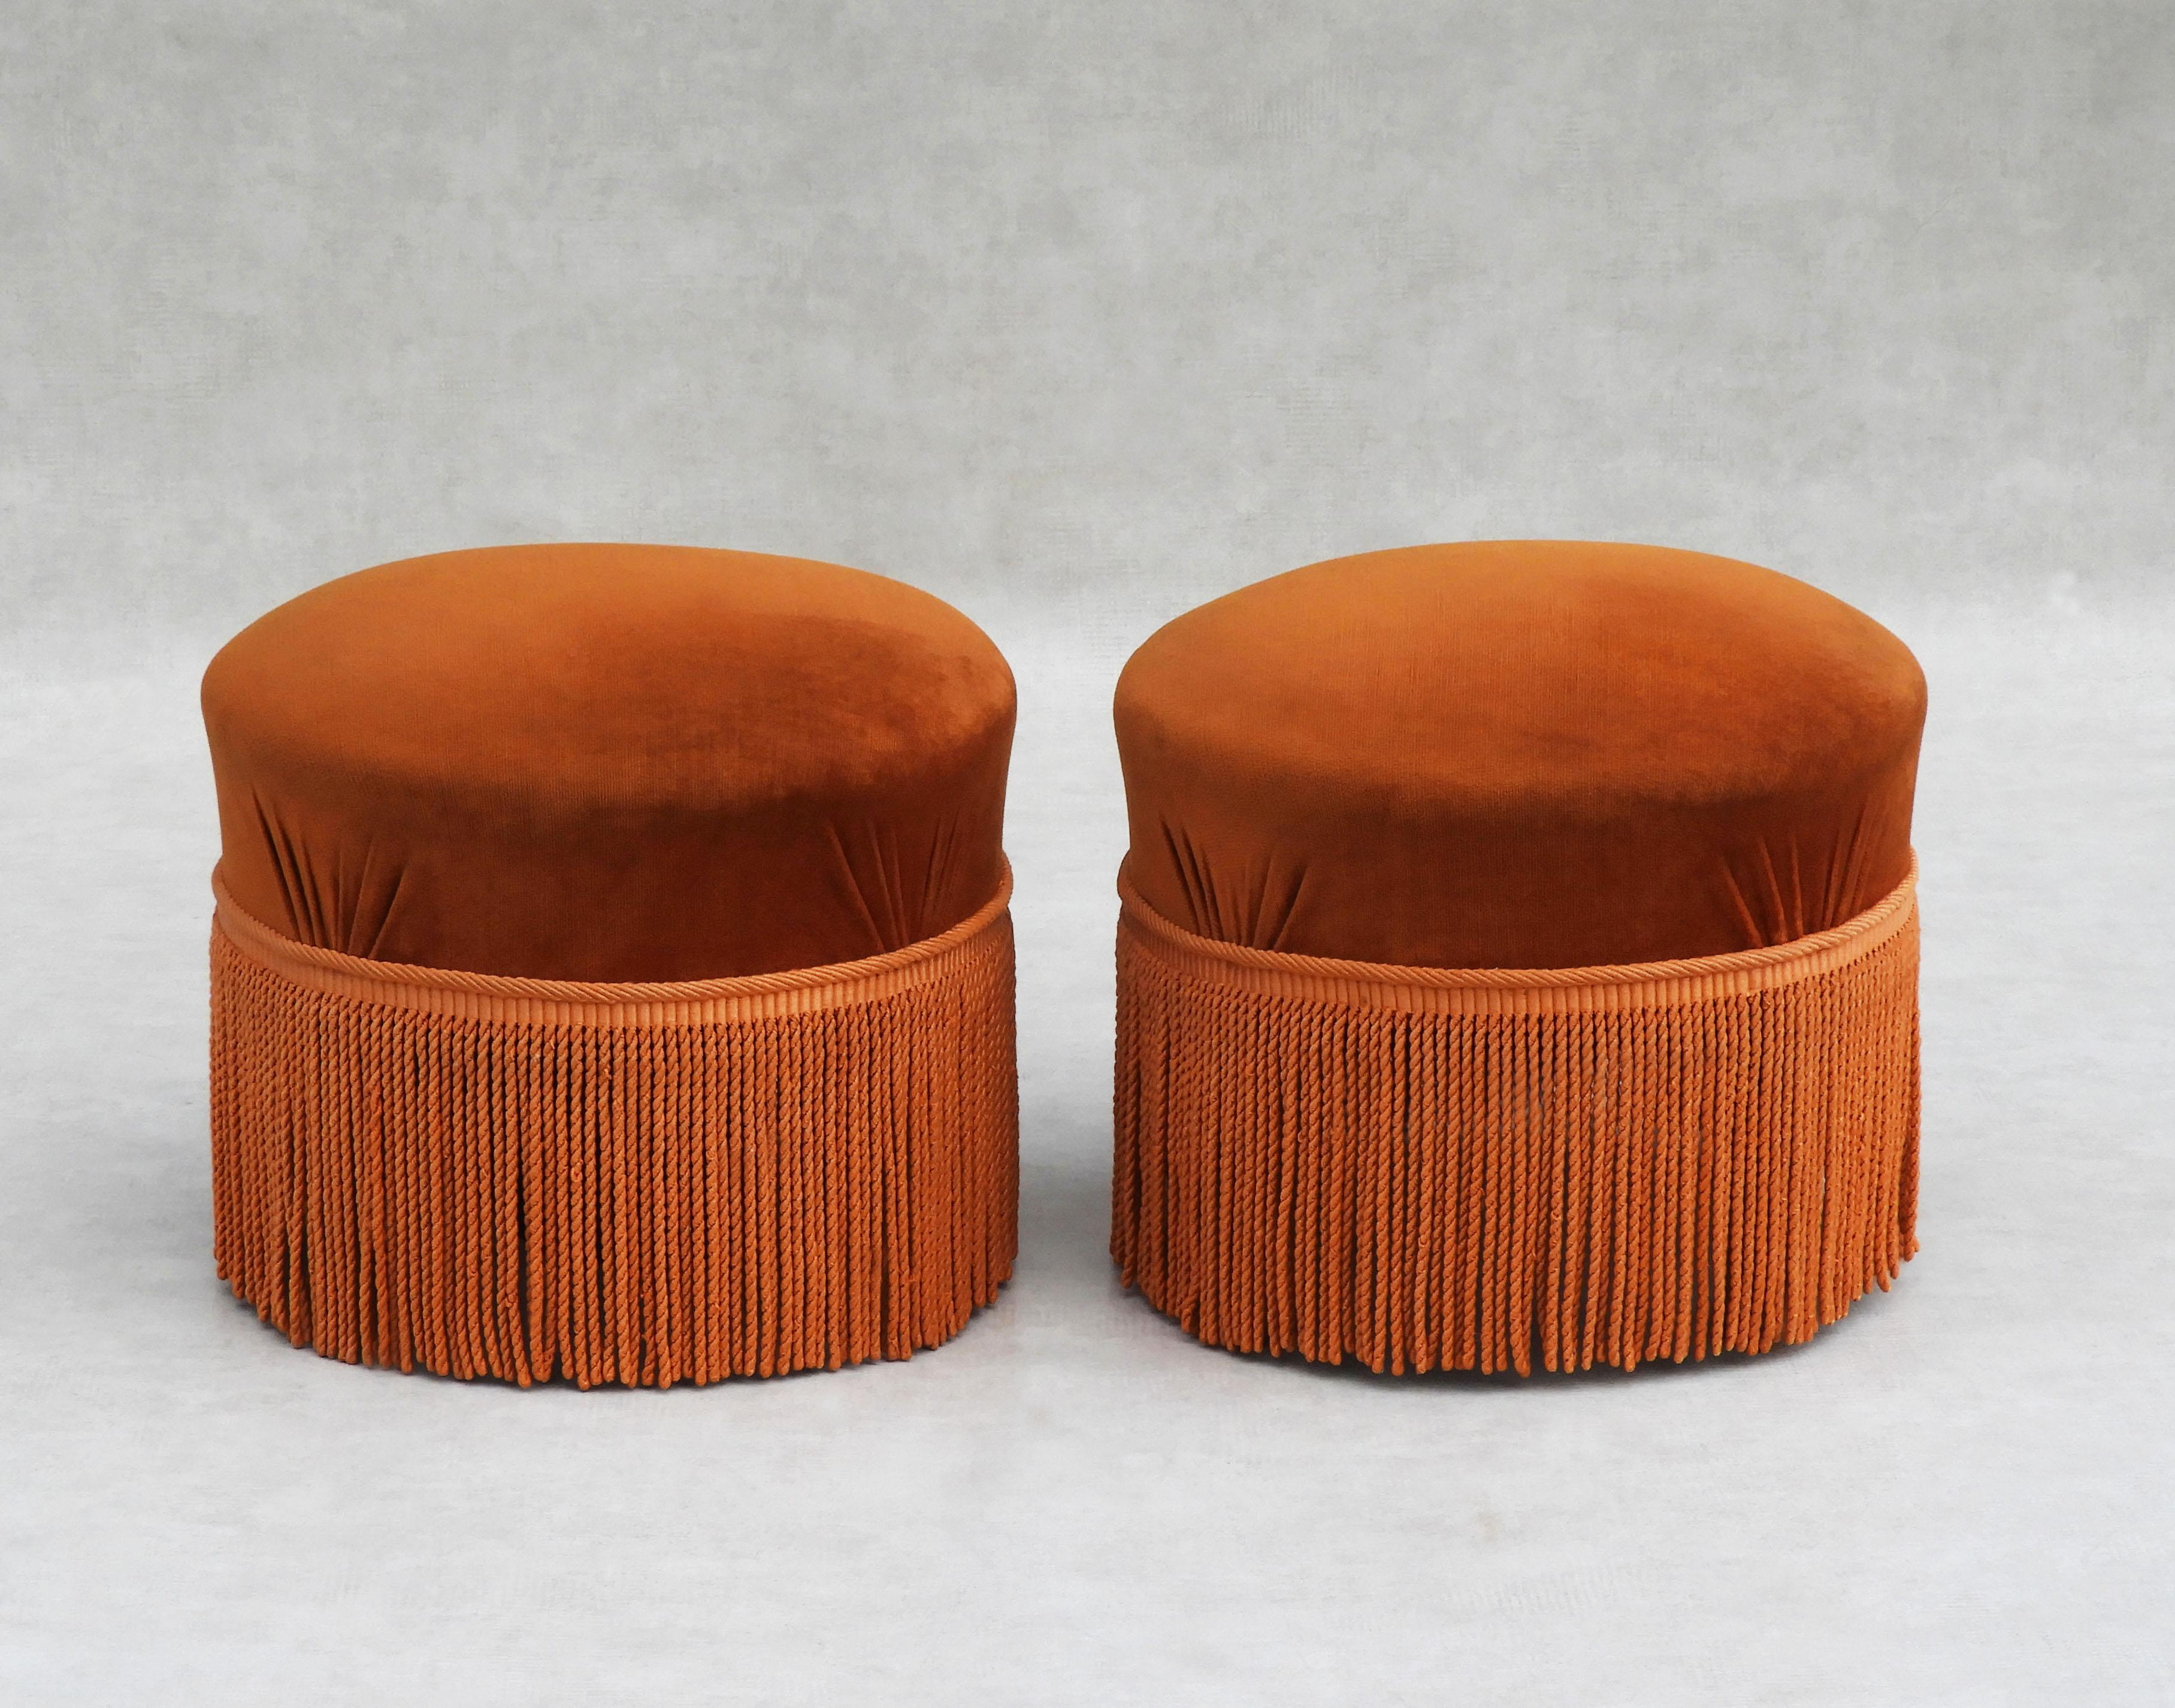 Gorgeous pair of mid-century French Ottomans.

Glamorous footstools in vibrant orange velvet velour trimmed with long floor-length fringe.
Round upholstered seat supported by four wooden legs.
All original upholstery in very good vintage